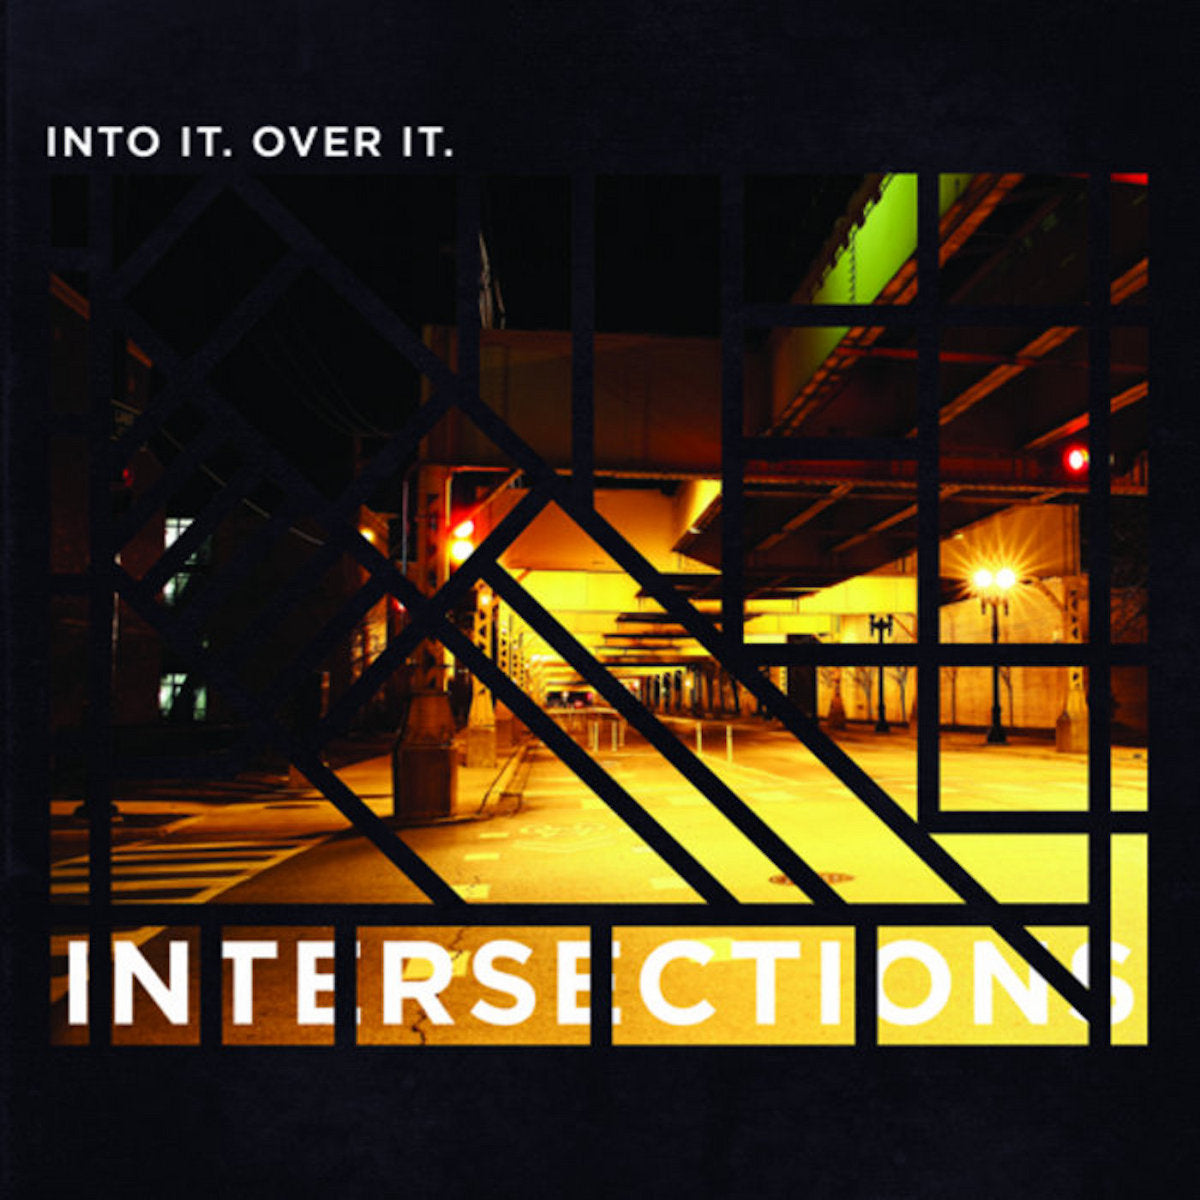 Into It. Over It. "Intersections" 12" Vinyl